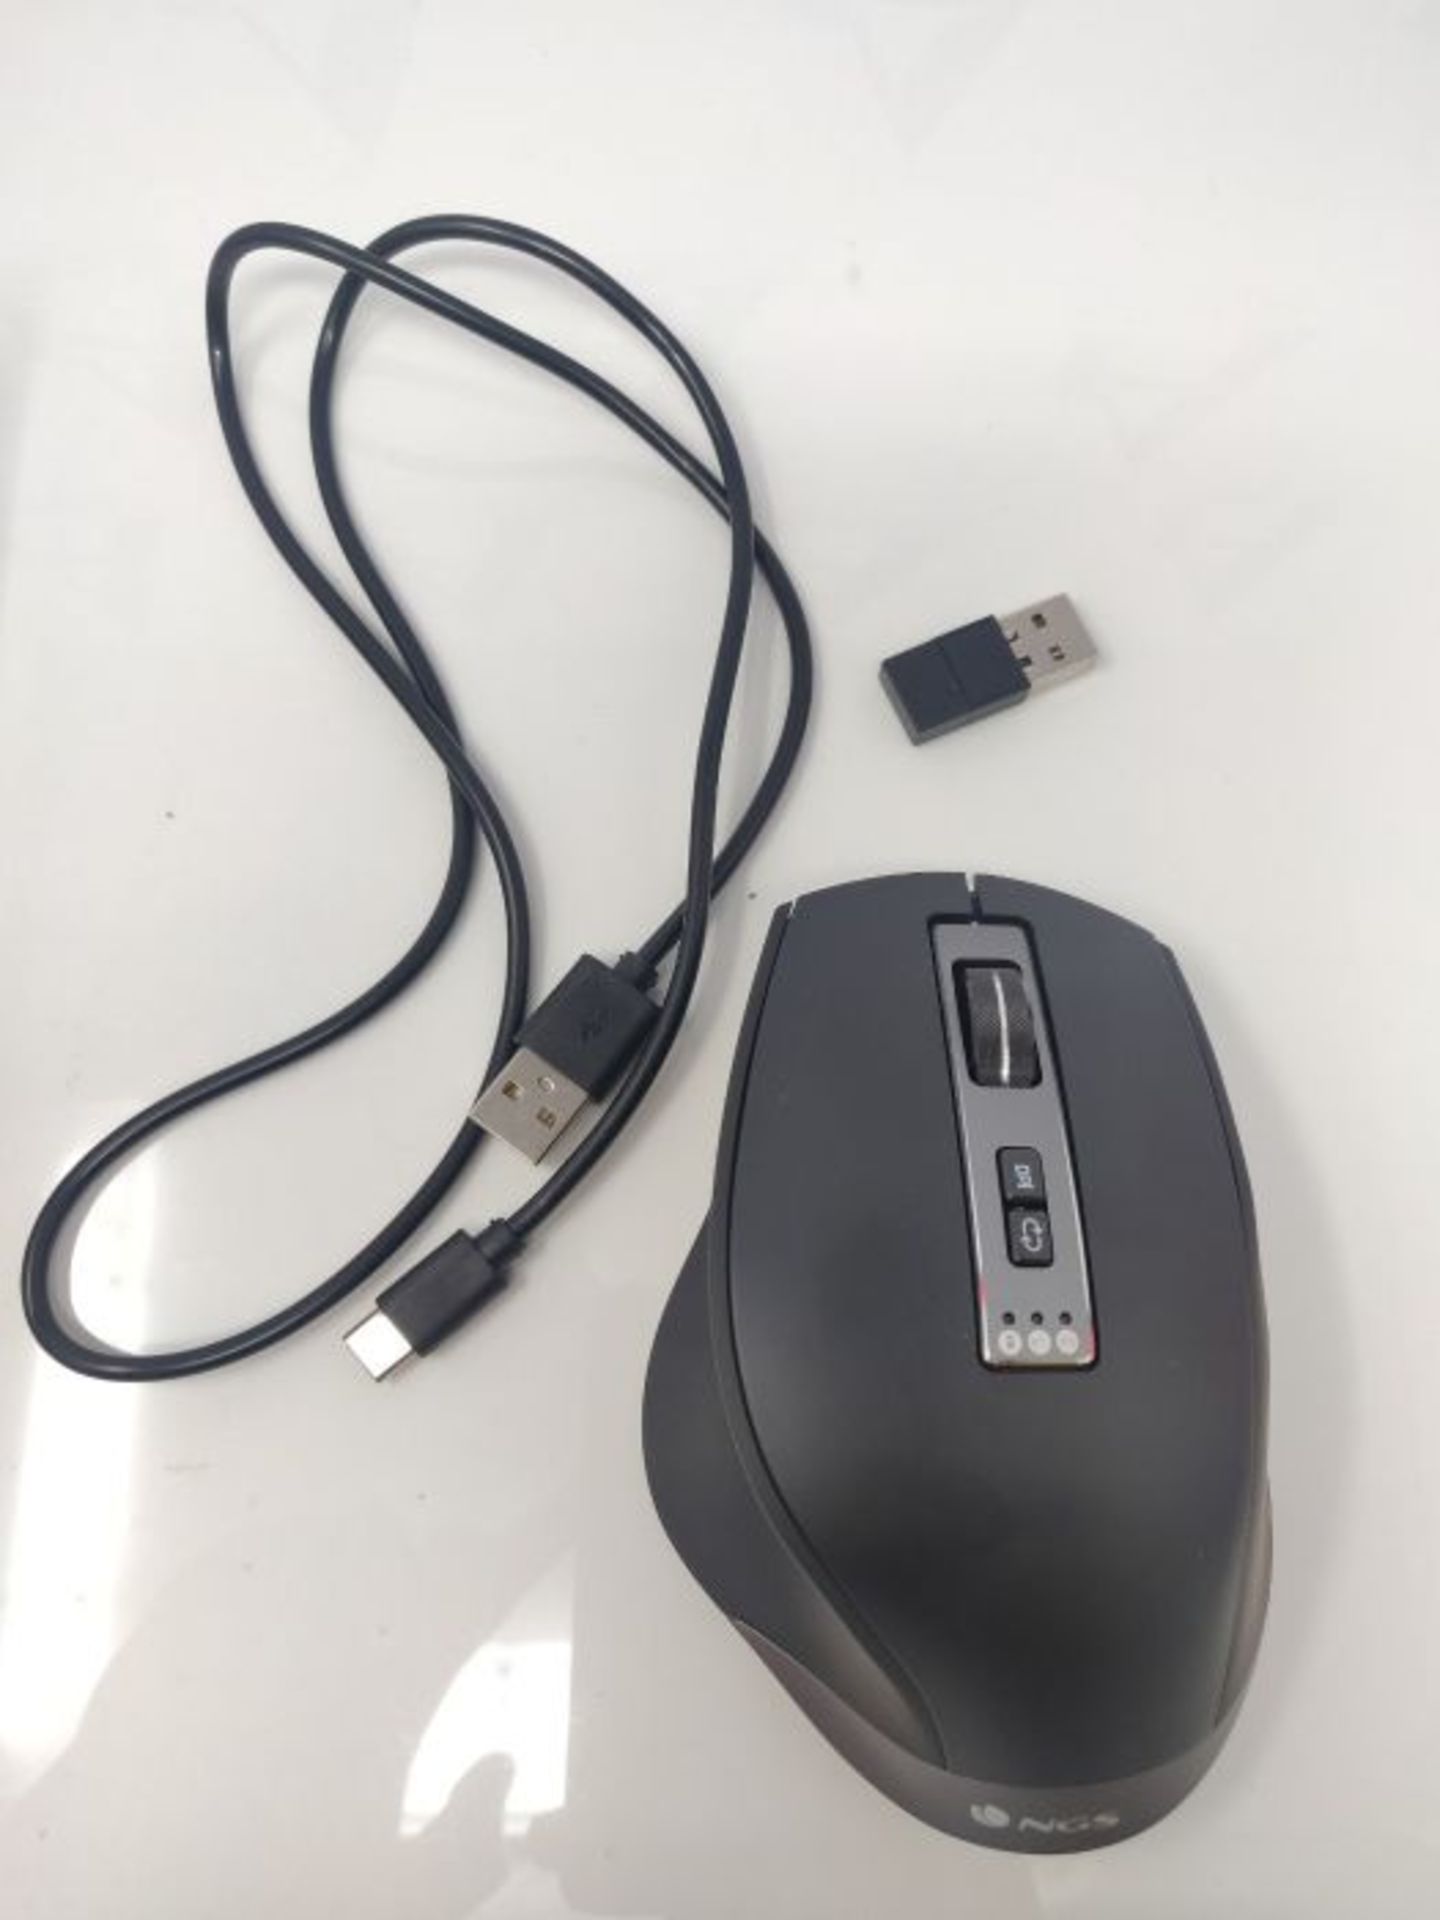 NGS BLUR-RB- Rechargeable Wireless Multi-Device Mouse, with Bluetooth 4.0/4.0, 800/160 - Image 3 of 3